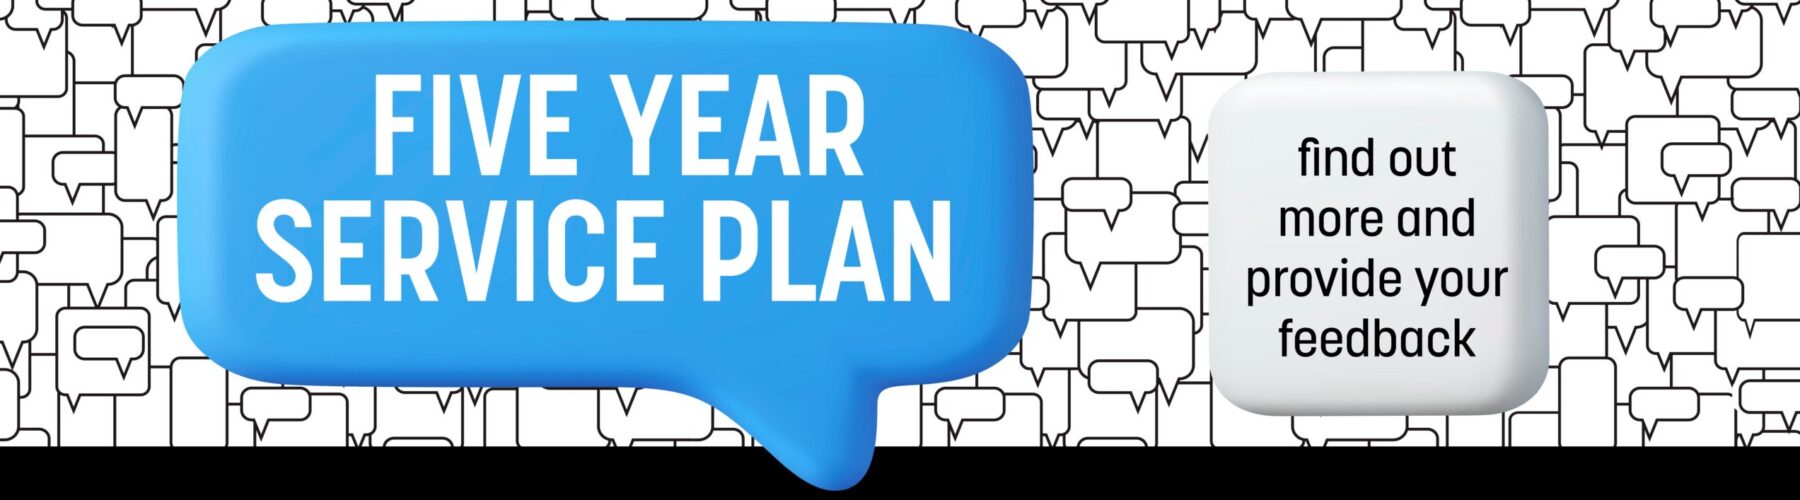 Five Year Service Plan for London Transit. Find out more about the reason for the plan and ways to provide your feedback by clicking here and going to the web post.